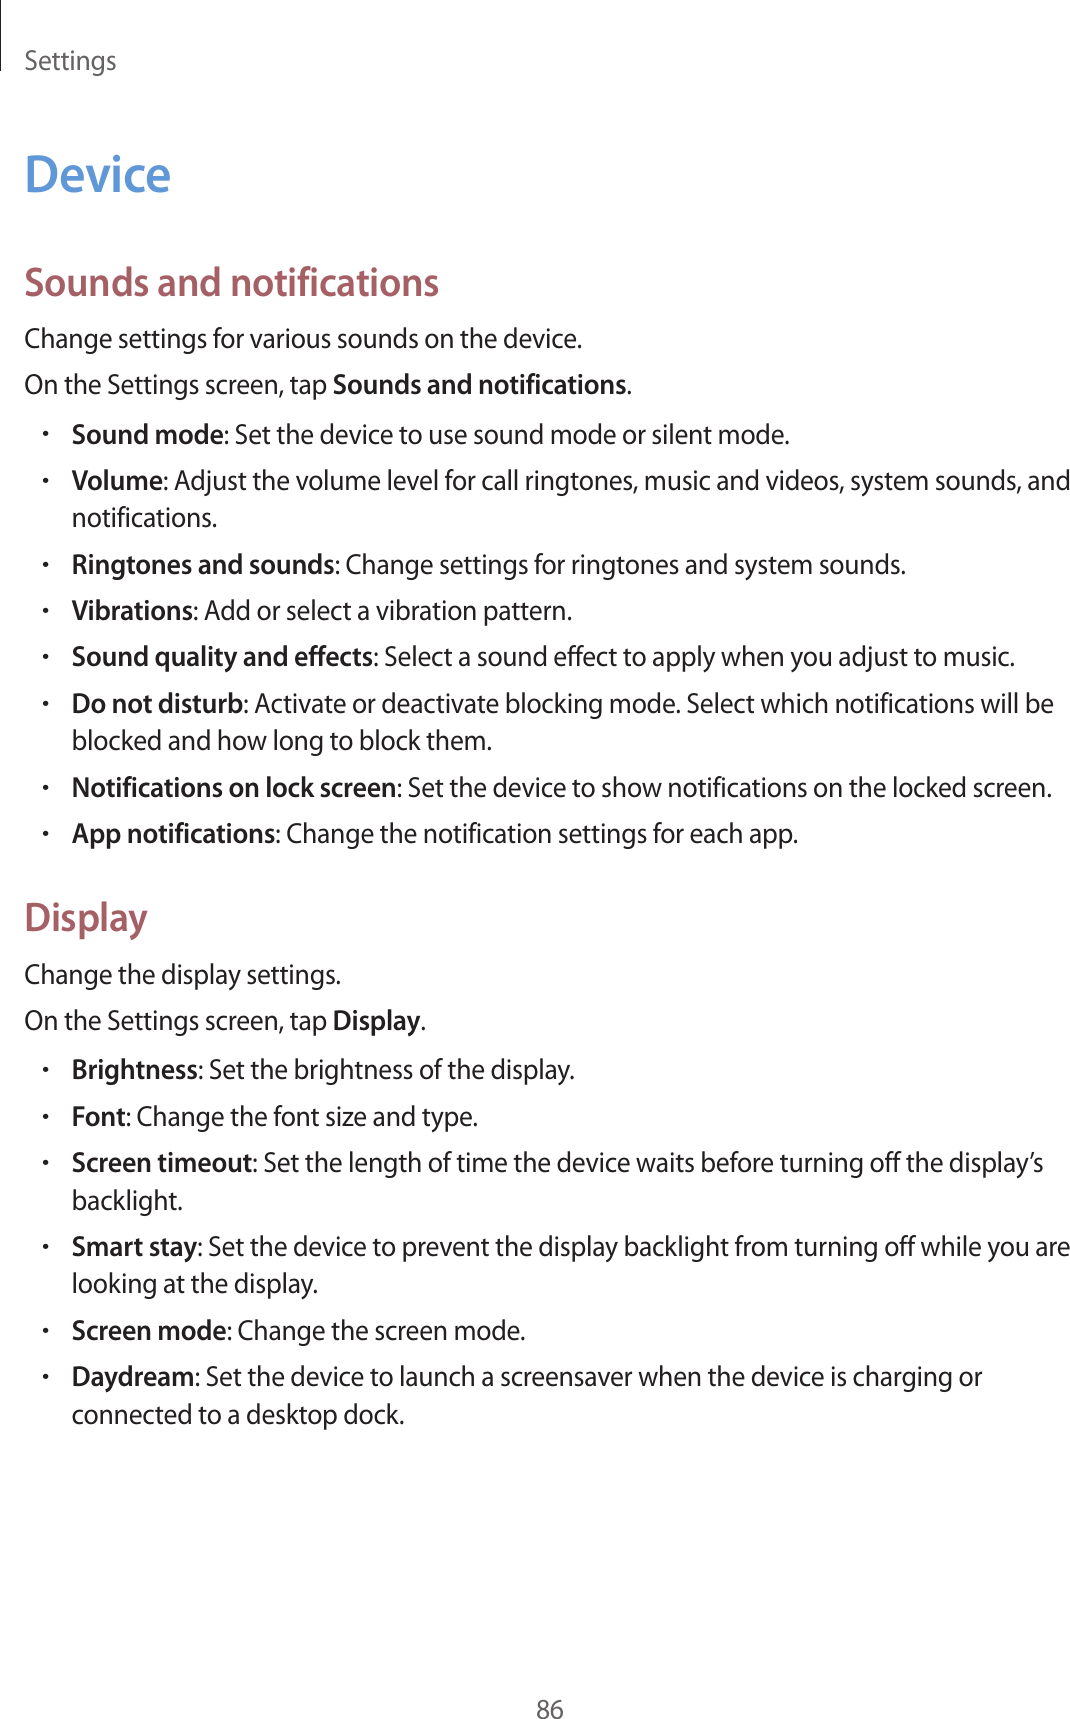 Settings86DeviceSounds and notificationsChange settings for various sounds on the device.On the Settings screen, tap Sounds and notifications.•Sound mode: Set the device to use sound mode or silent mode.•Volume: Adjust the volume level for call ringtones, music and videos, system sounds, and notifications.•Ringtones and sounds: Change settings for ringtones and system sounds.•Vibrations: Add or select a vibration pattern.•Sound quality and effects: Select a sound effect to apply when you adjust to music.•Do not disturb: Activate or deactivate blocking mode. Select which notifications will be blocked and how long to block them.•Notifications on lock screen: Set the device to show notifications on the locked screen.•App notifications: Change the notification settings for each app.DisplayChange the display settings.On the Settings screen, tap Display.•Brightness: Set the brightness of the display.•Font: Change the font size and type.•Screen timeout: Set the length of time the device waits before turning off the display’s backlight.•Smart stay: Set the device to prevent the display backlight from turning off while you are looking at the display.•Screen mode: Change the screen mode.•Daydream: Set the device to launch a screensaver when the device is charging or connected to a desktop dock.